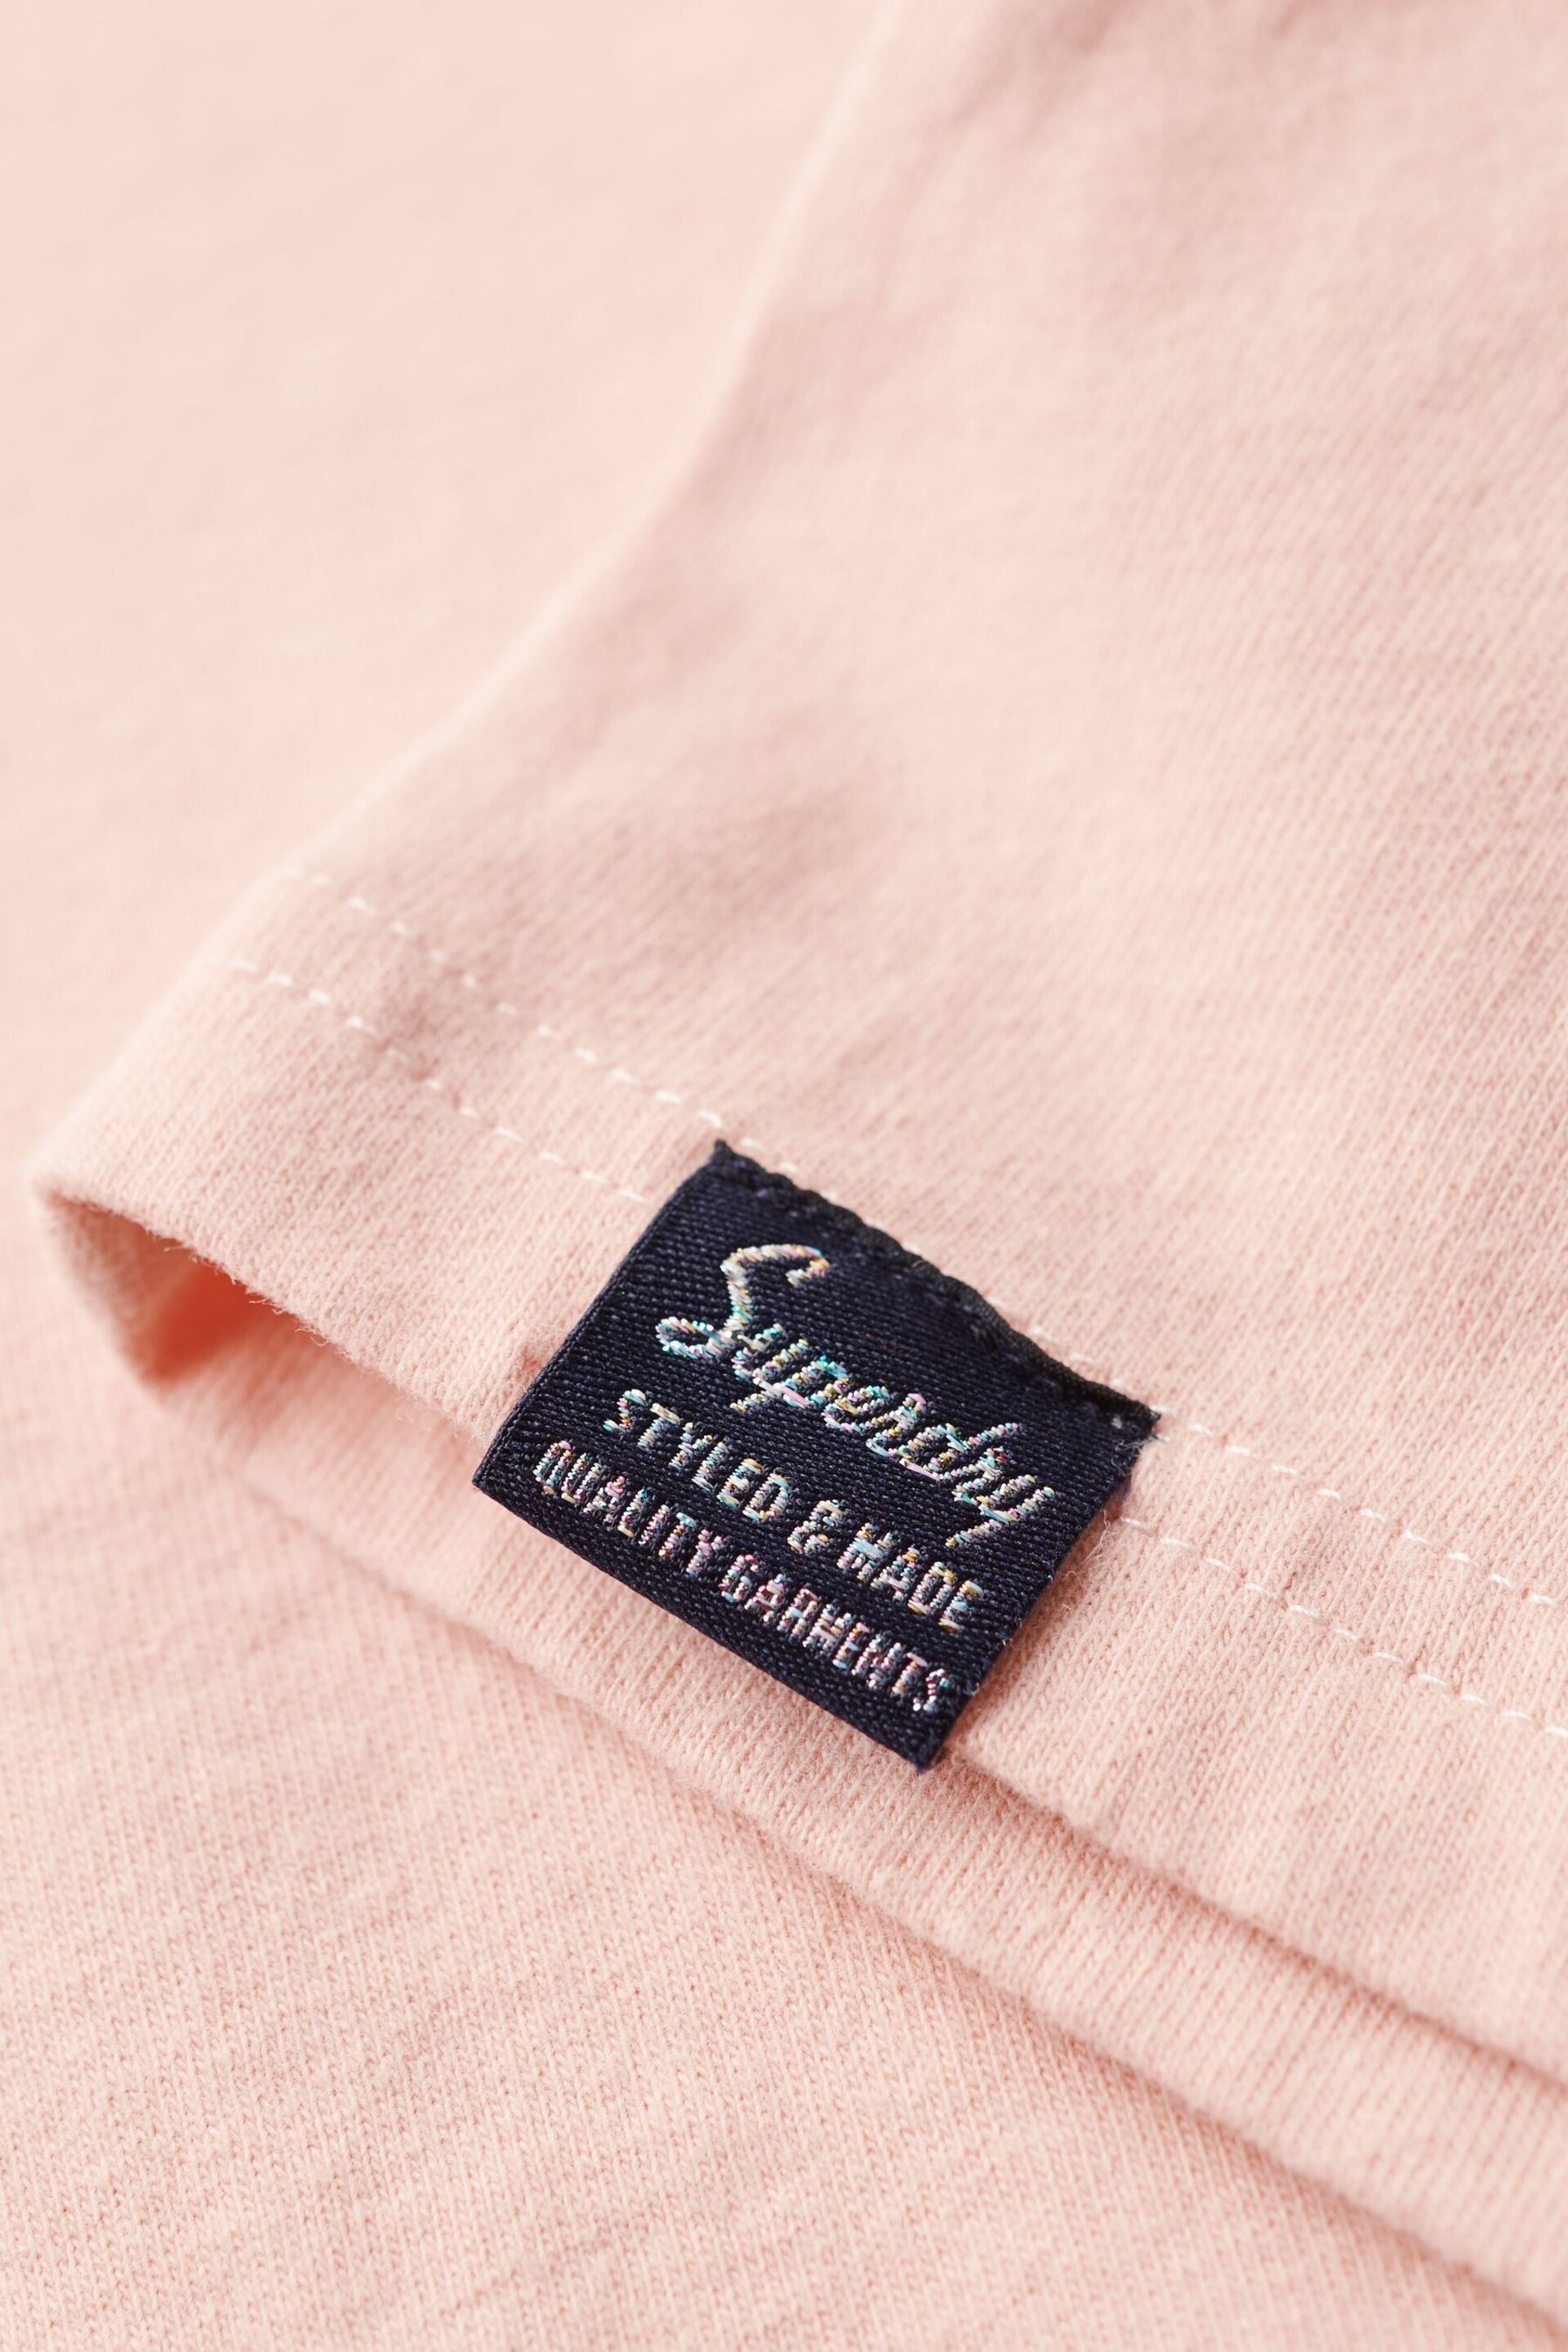 Superdry Pink Embossed Relaxed T-Shirt - Image 6 of 6